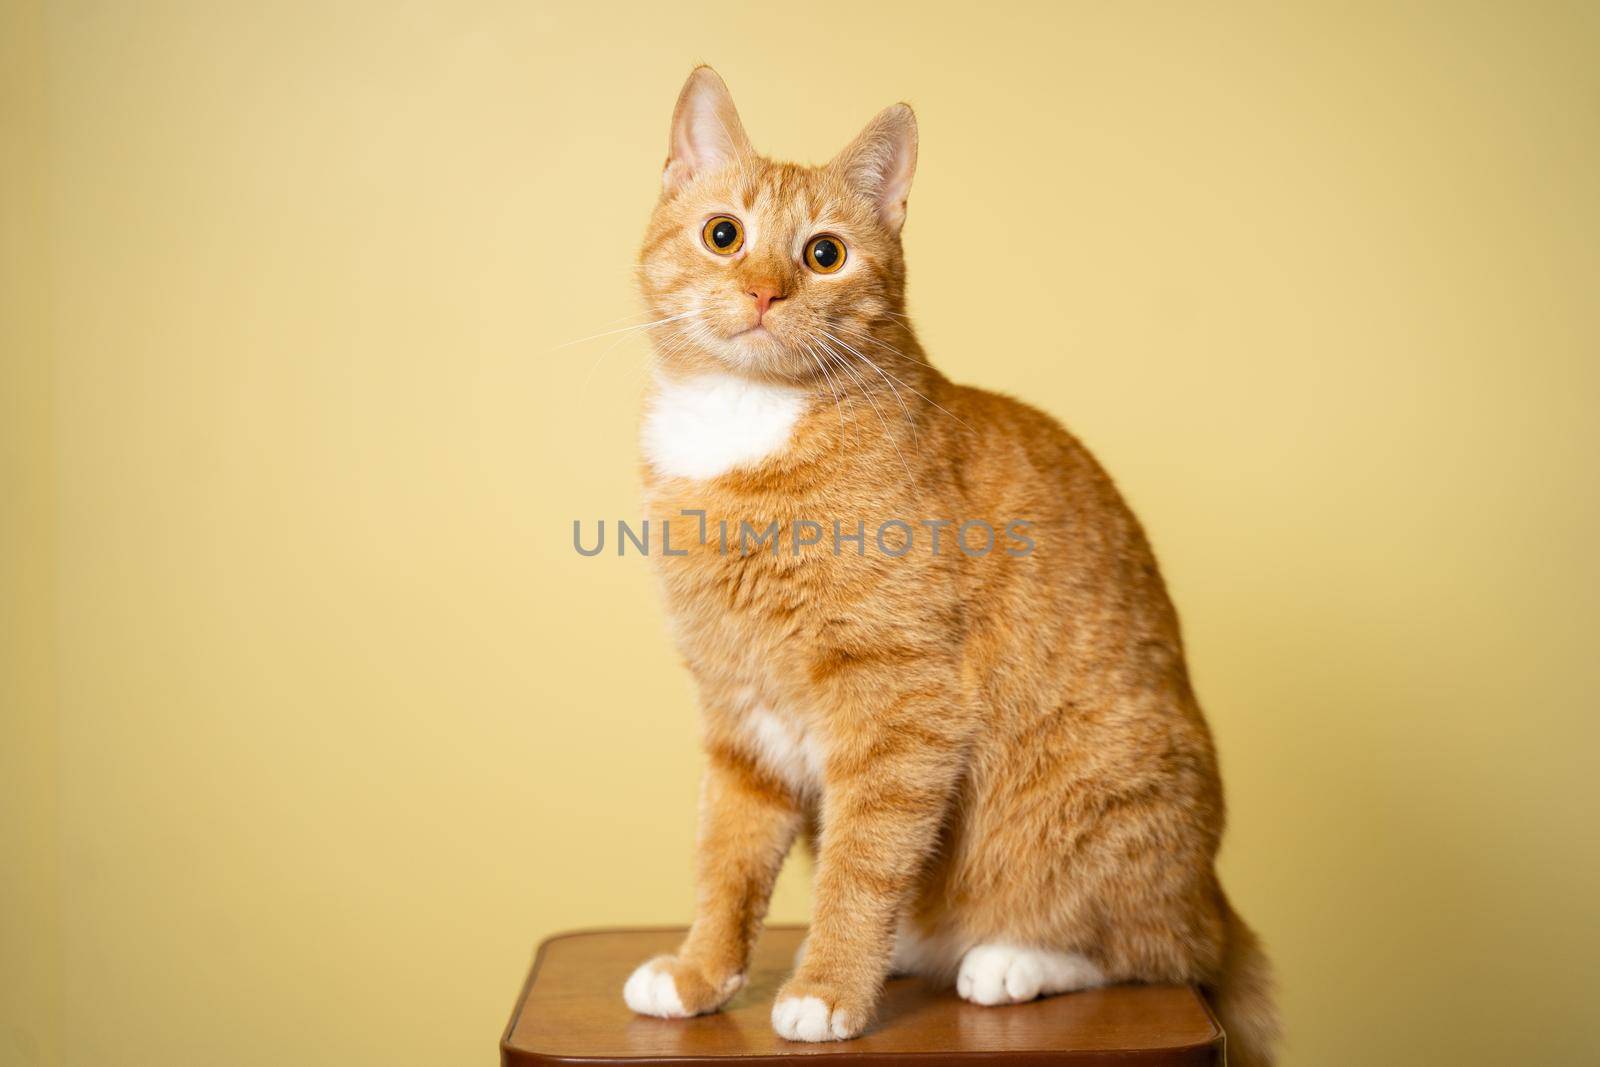 The theme of pets, love and protection of animals. Ginger cat posing on yellow background in studio. Cute orange cat. perfect pet companion. Red fluffy friend. Redhead pet animal portrait studio shot by Tomashevska